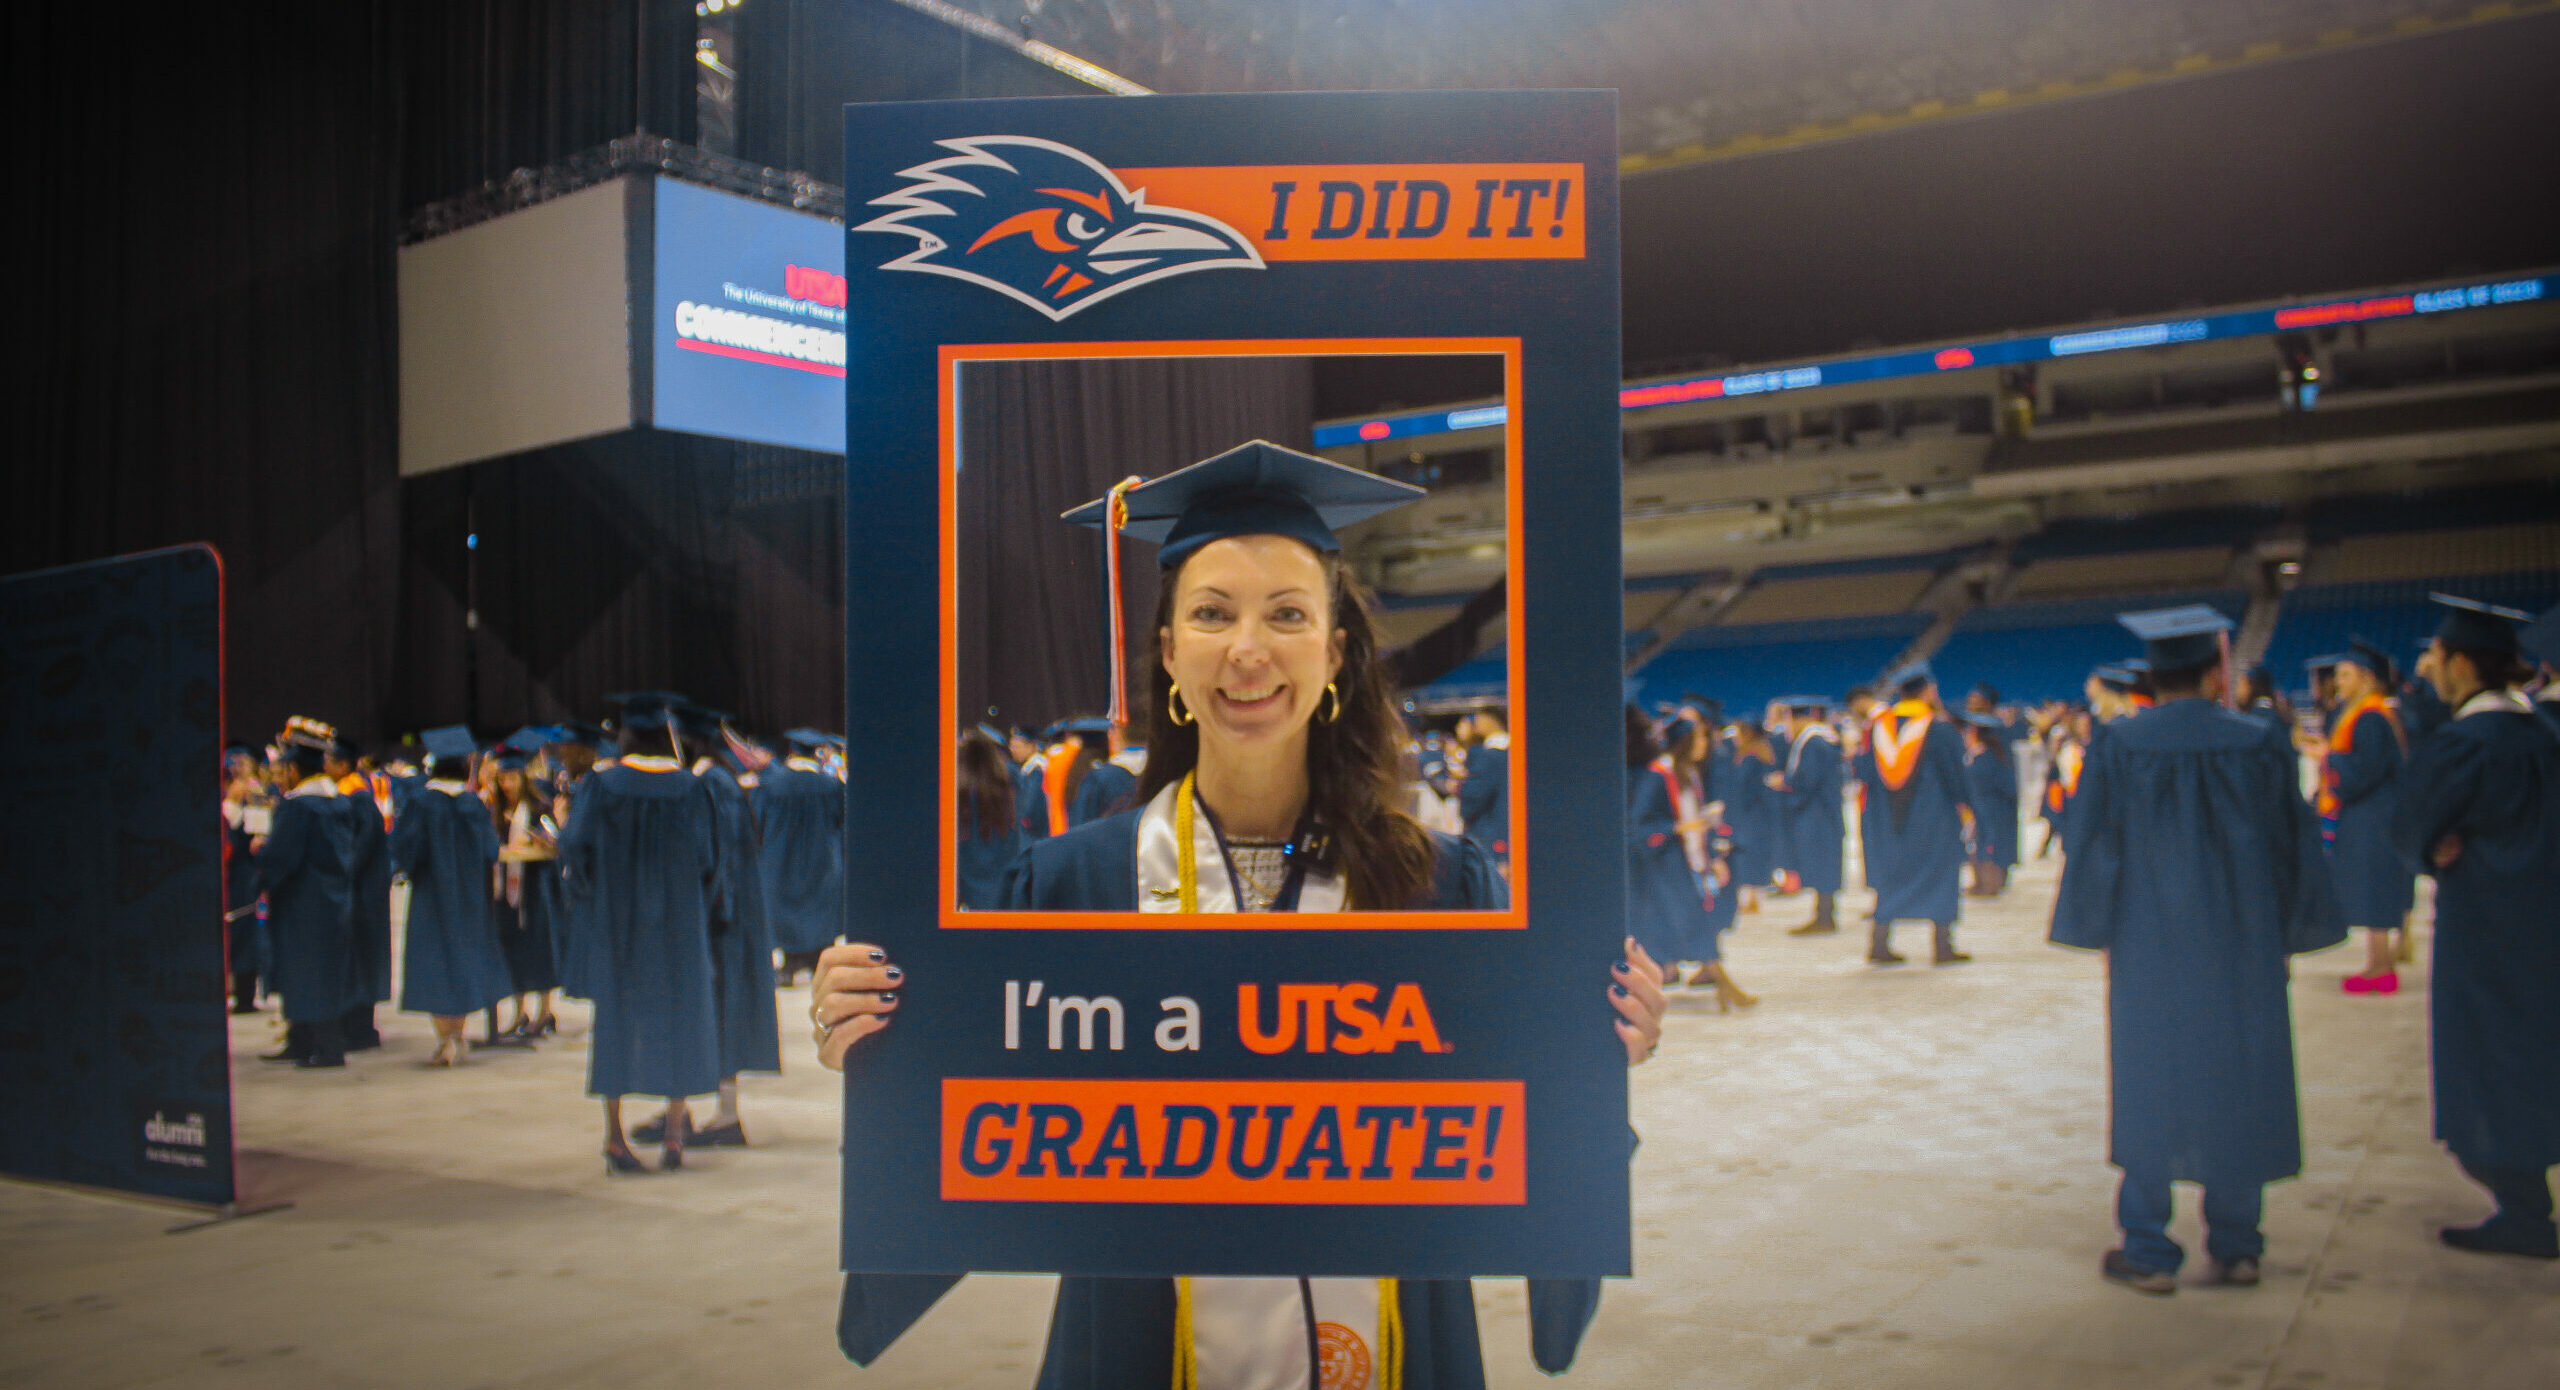 Online Communication Degree graduate at commencement holding a photo frame that says "I did it! I am a UTSA Graduate!"